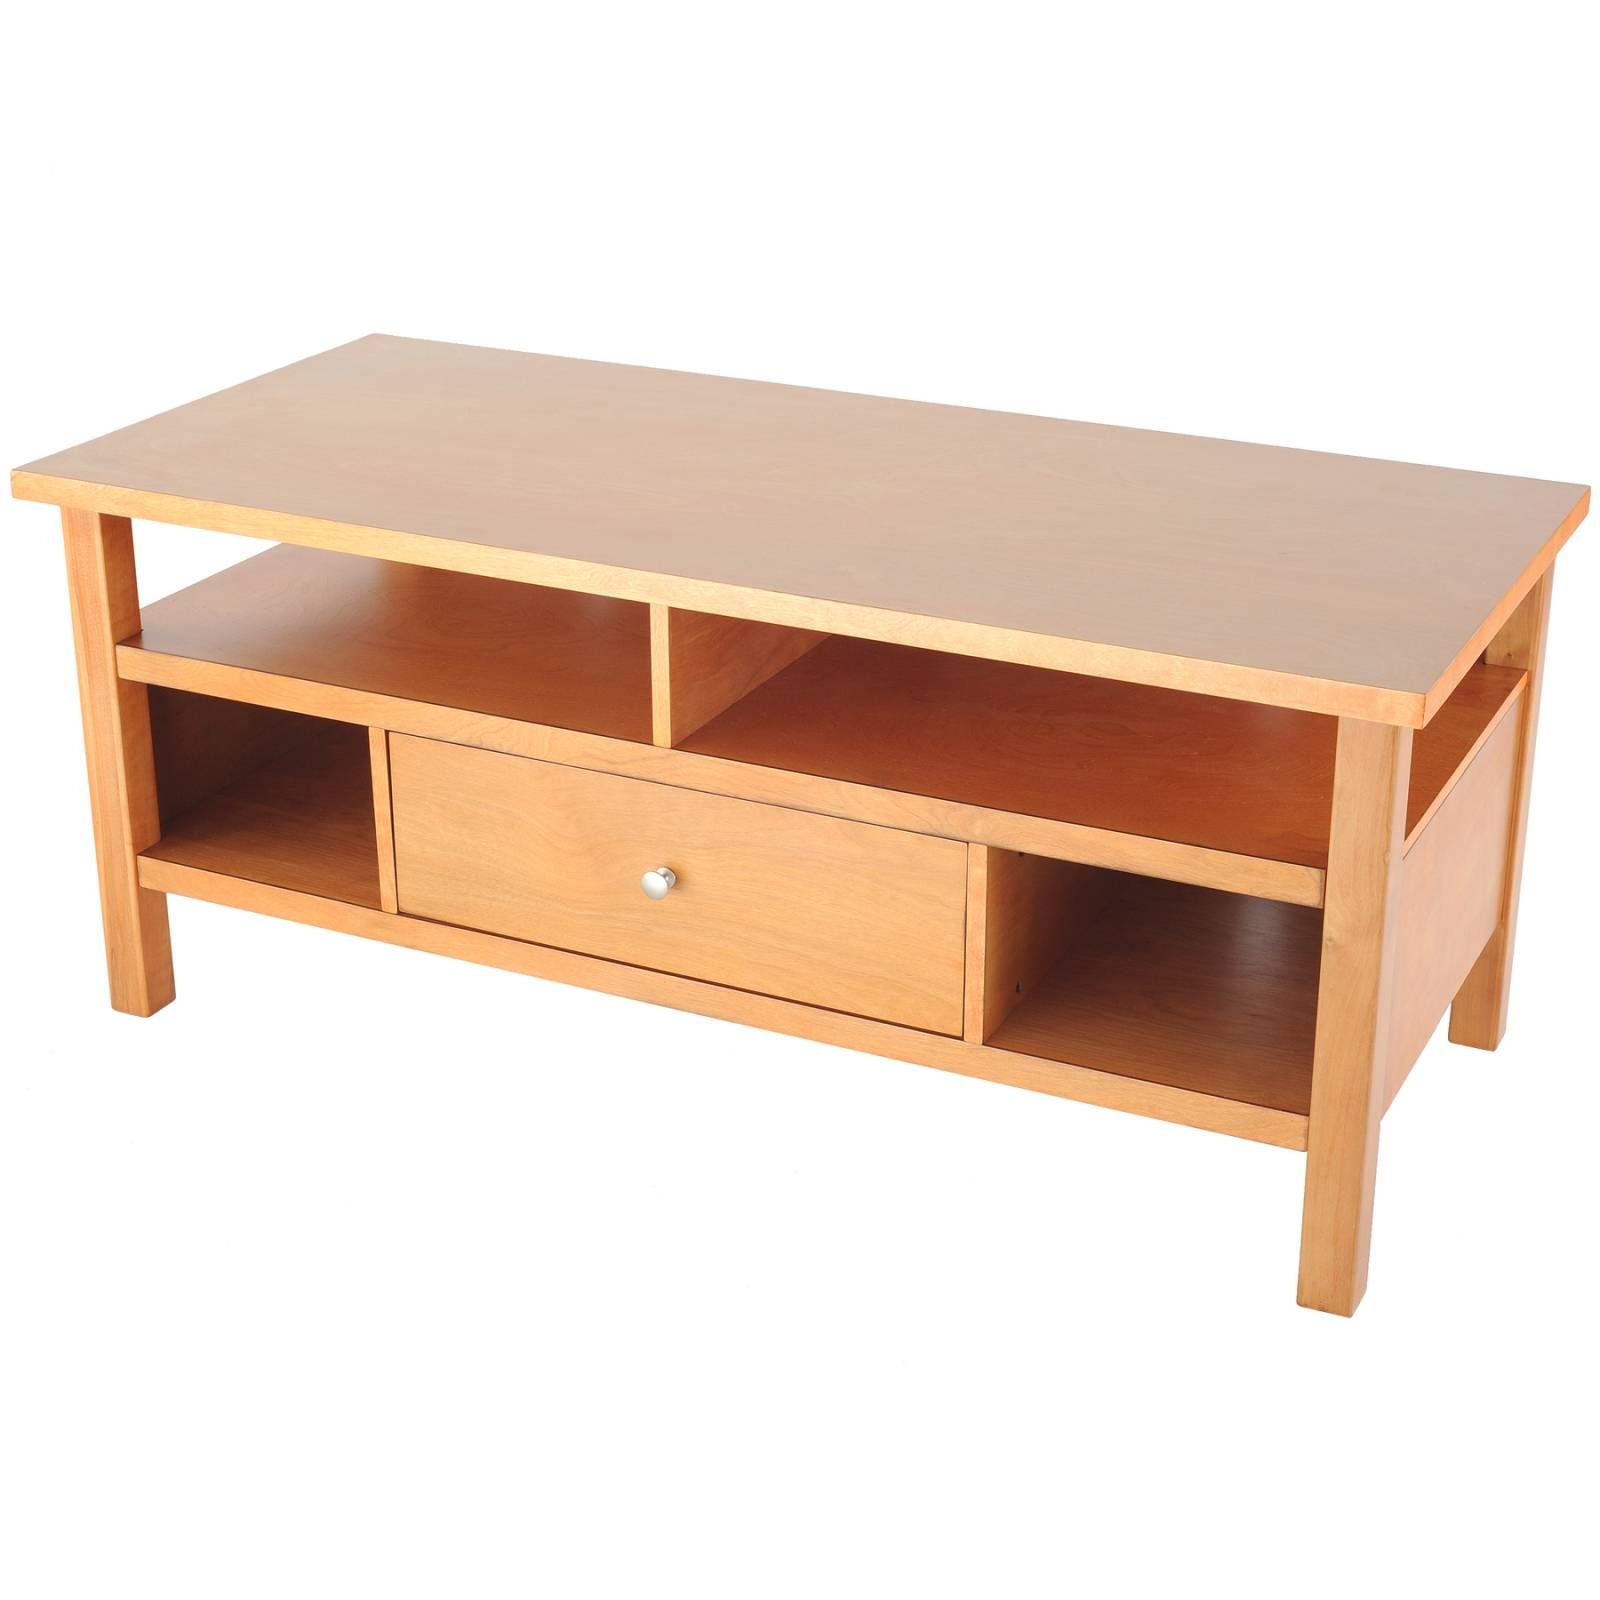 Wholesale / Bulk Dropshipper Flat Screen/tube Tv Stand With Drawer Intended For Maple Tv Stands For Flat Screens (View 1 of 15)